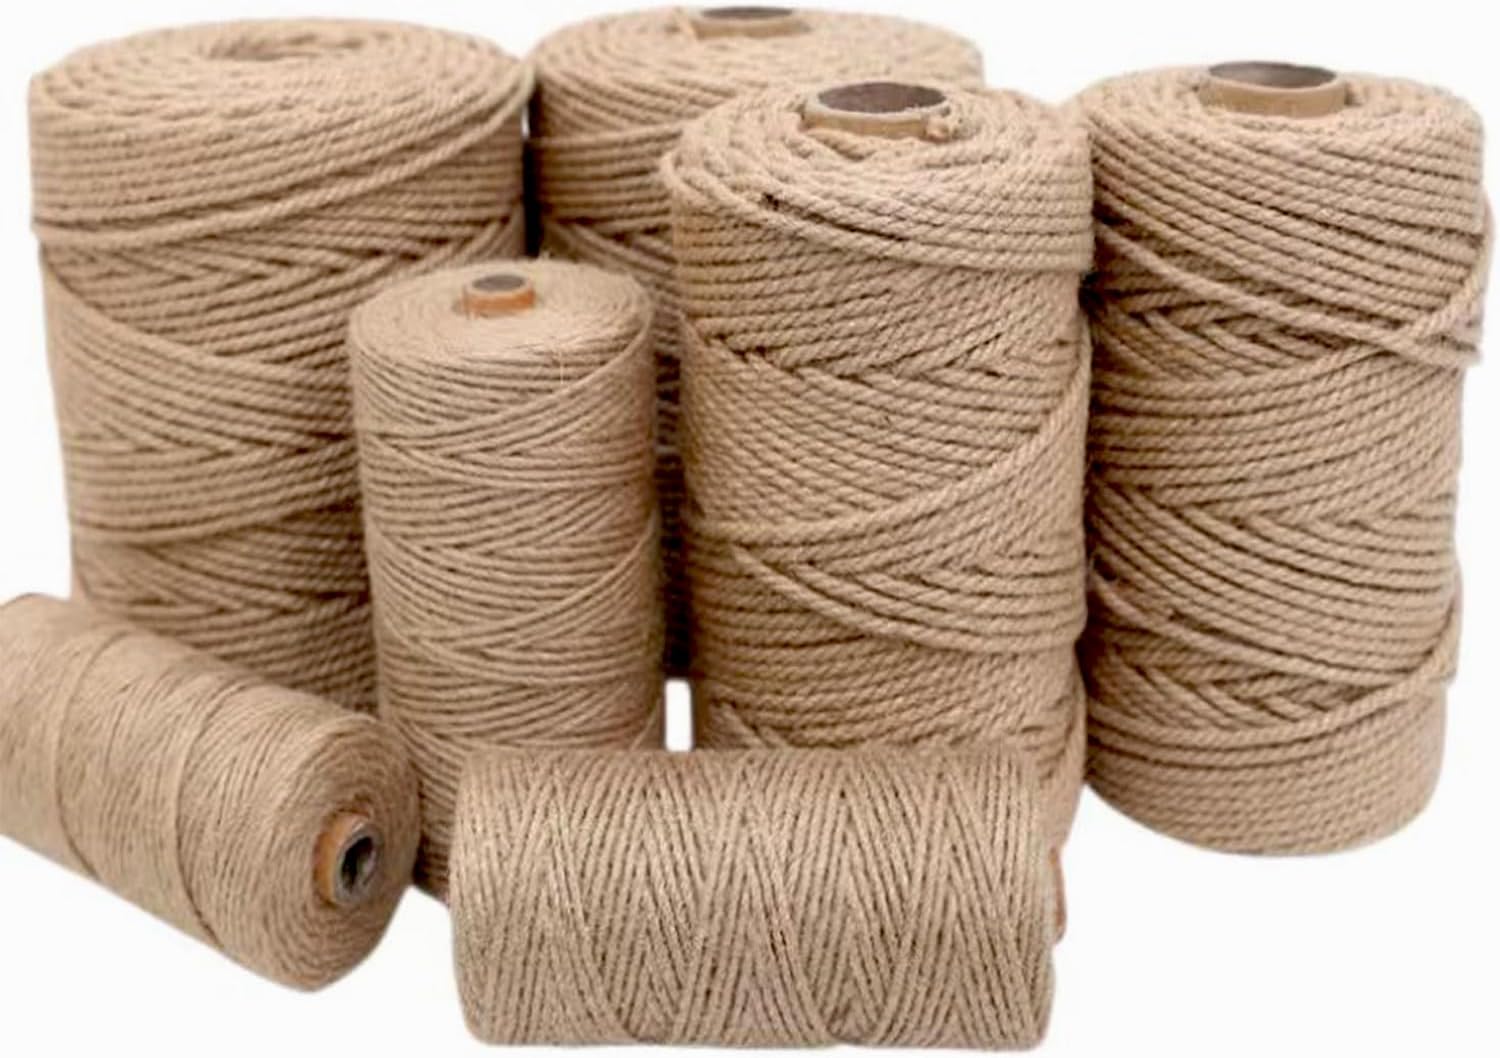 Tenn Well Natural Jute Twine, 656 Feet 2Ply Brown Twine String for